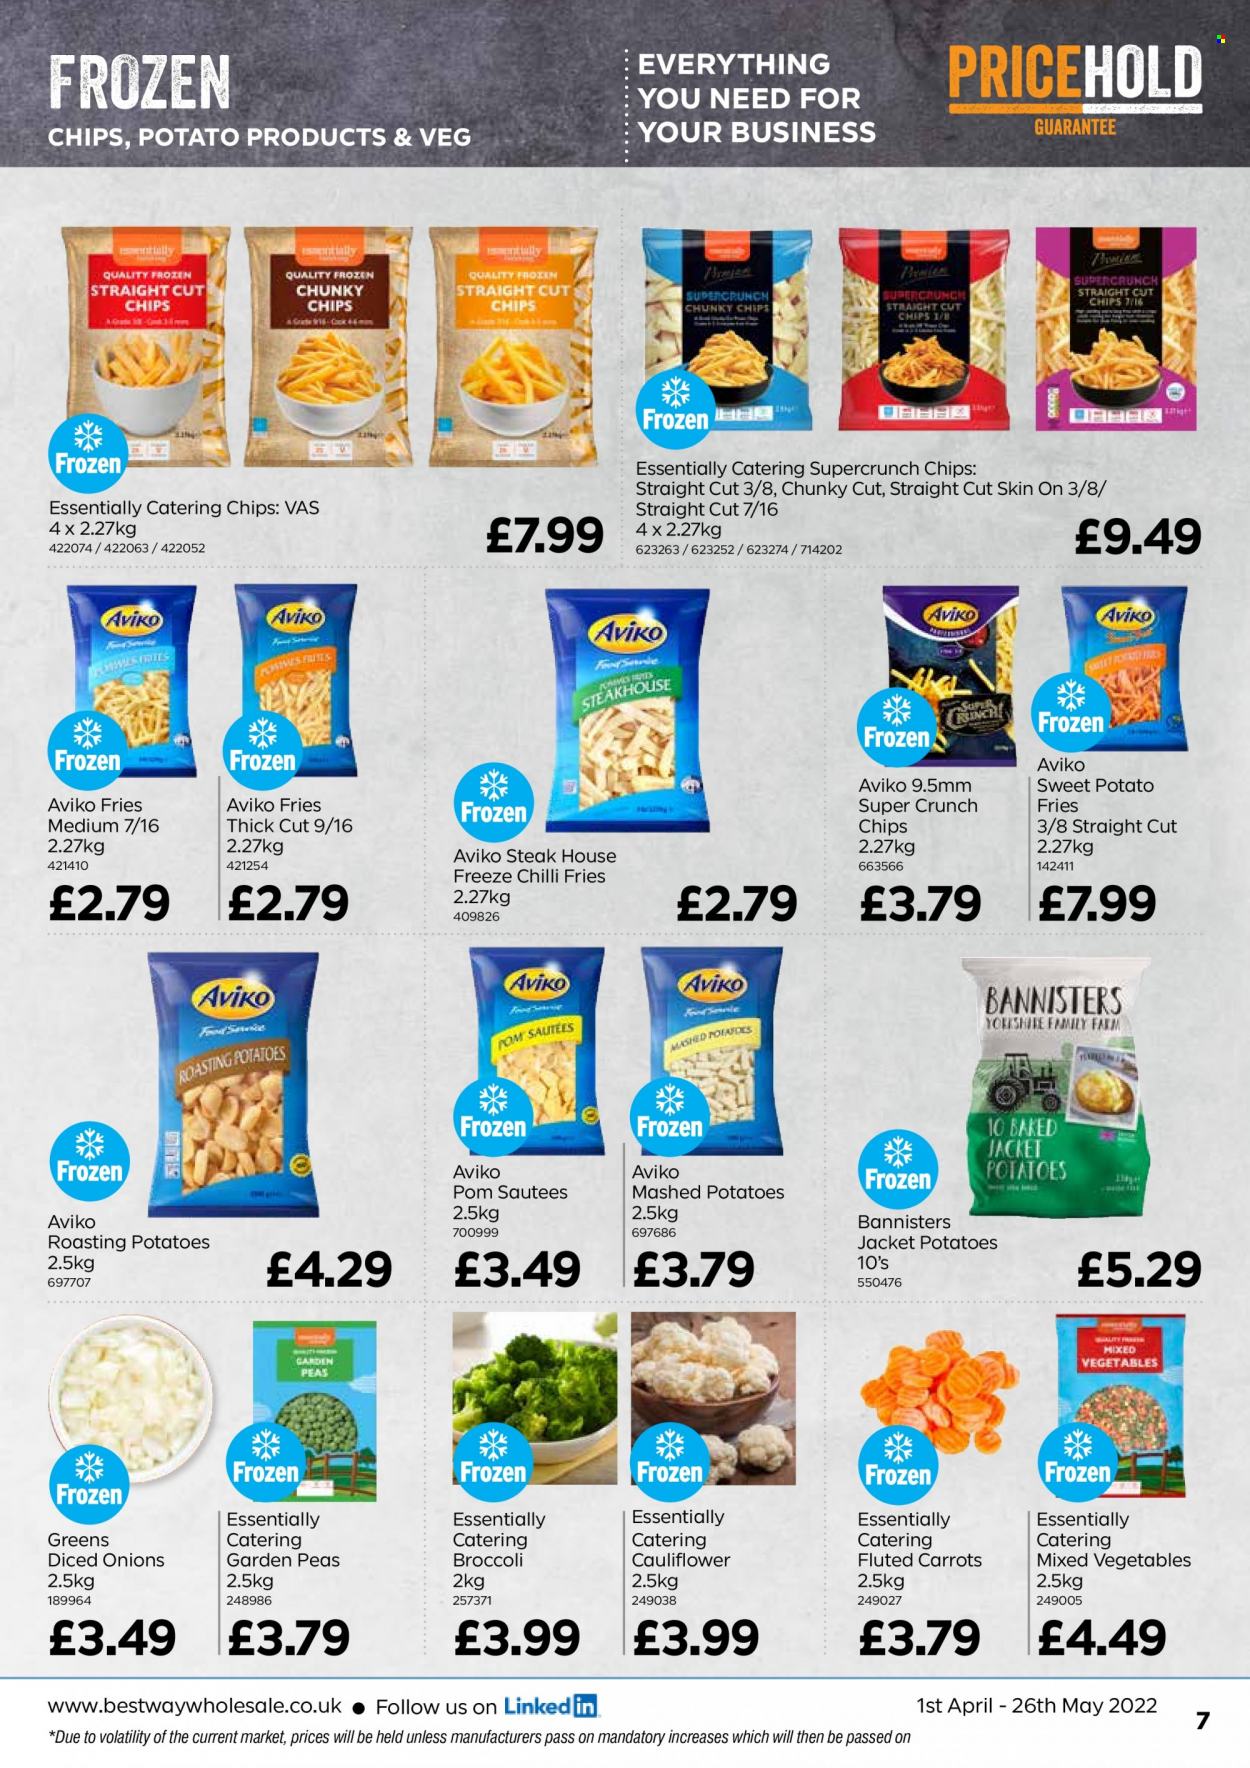 thumbnail - Bestway offer  - 01/04/2022 - 26/05/2022 - Sales products - broccoli, carrots, sweet potato, peas, onion, steak, mashed potatoes, mixed vegetables, frozen chips, sweet potato fries. Page 7.